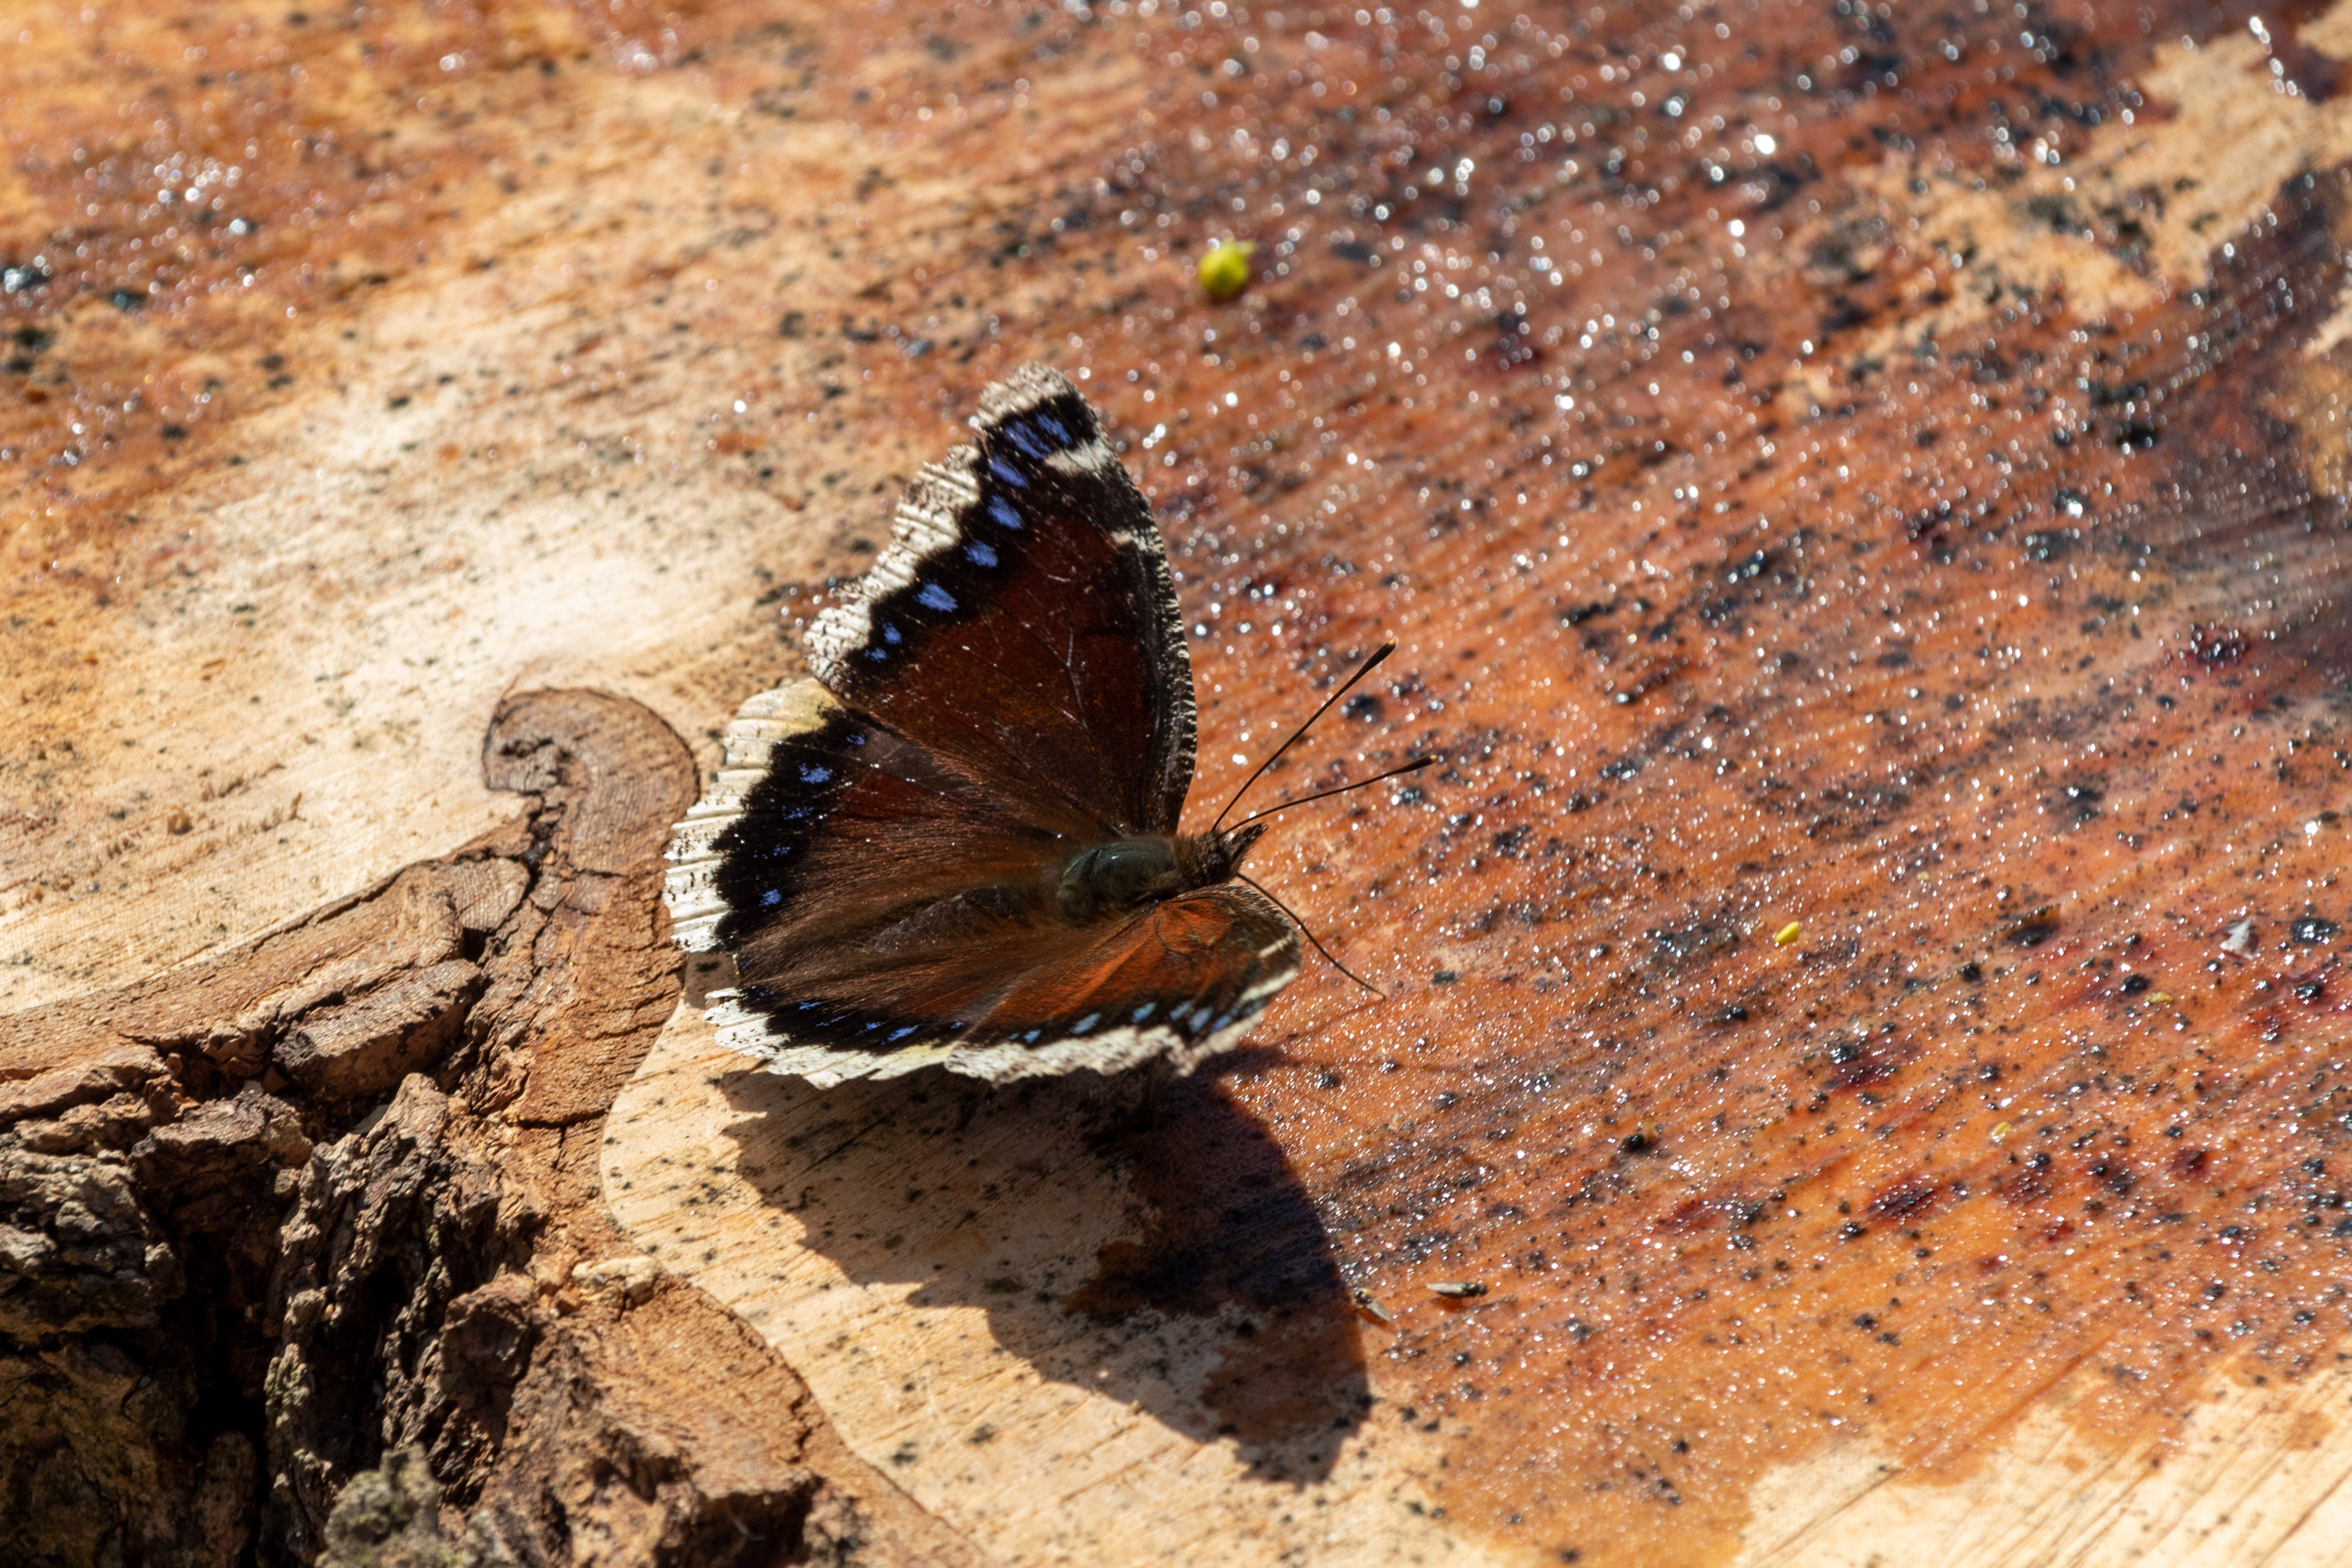 Butterfly with brown, blue, and white wings sipping sap from a tree stump